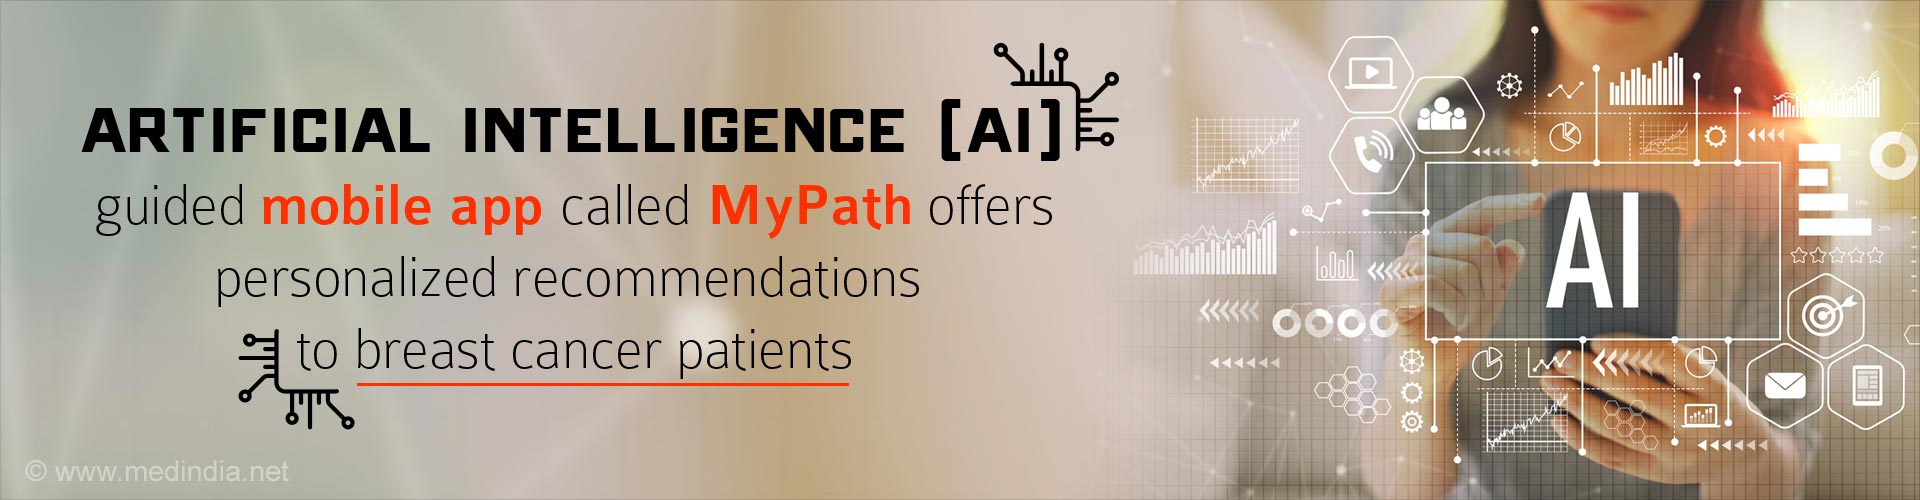 Artificial Intelligence (AI) guided mobile app called MyPath offers personalized recommendations to breast cancer patients.
